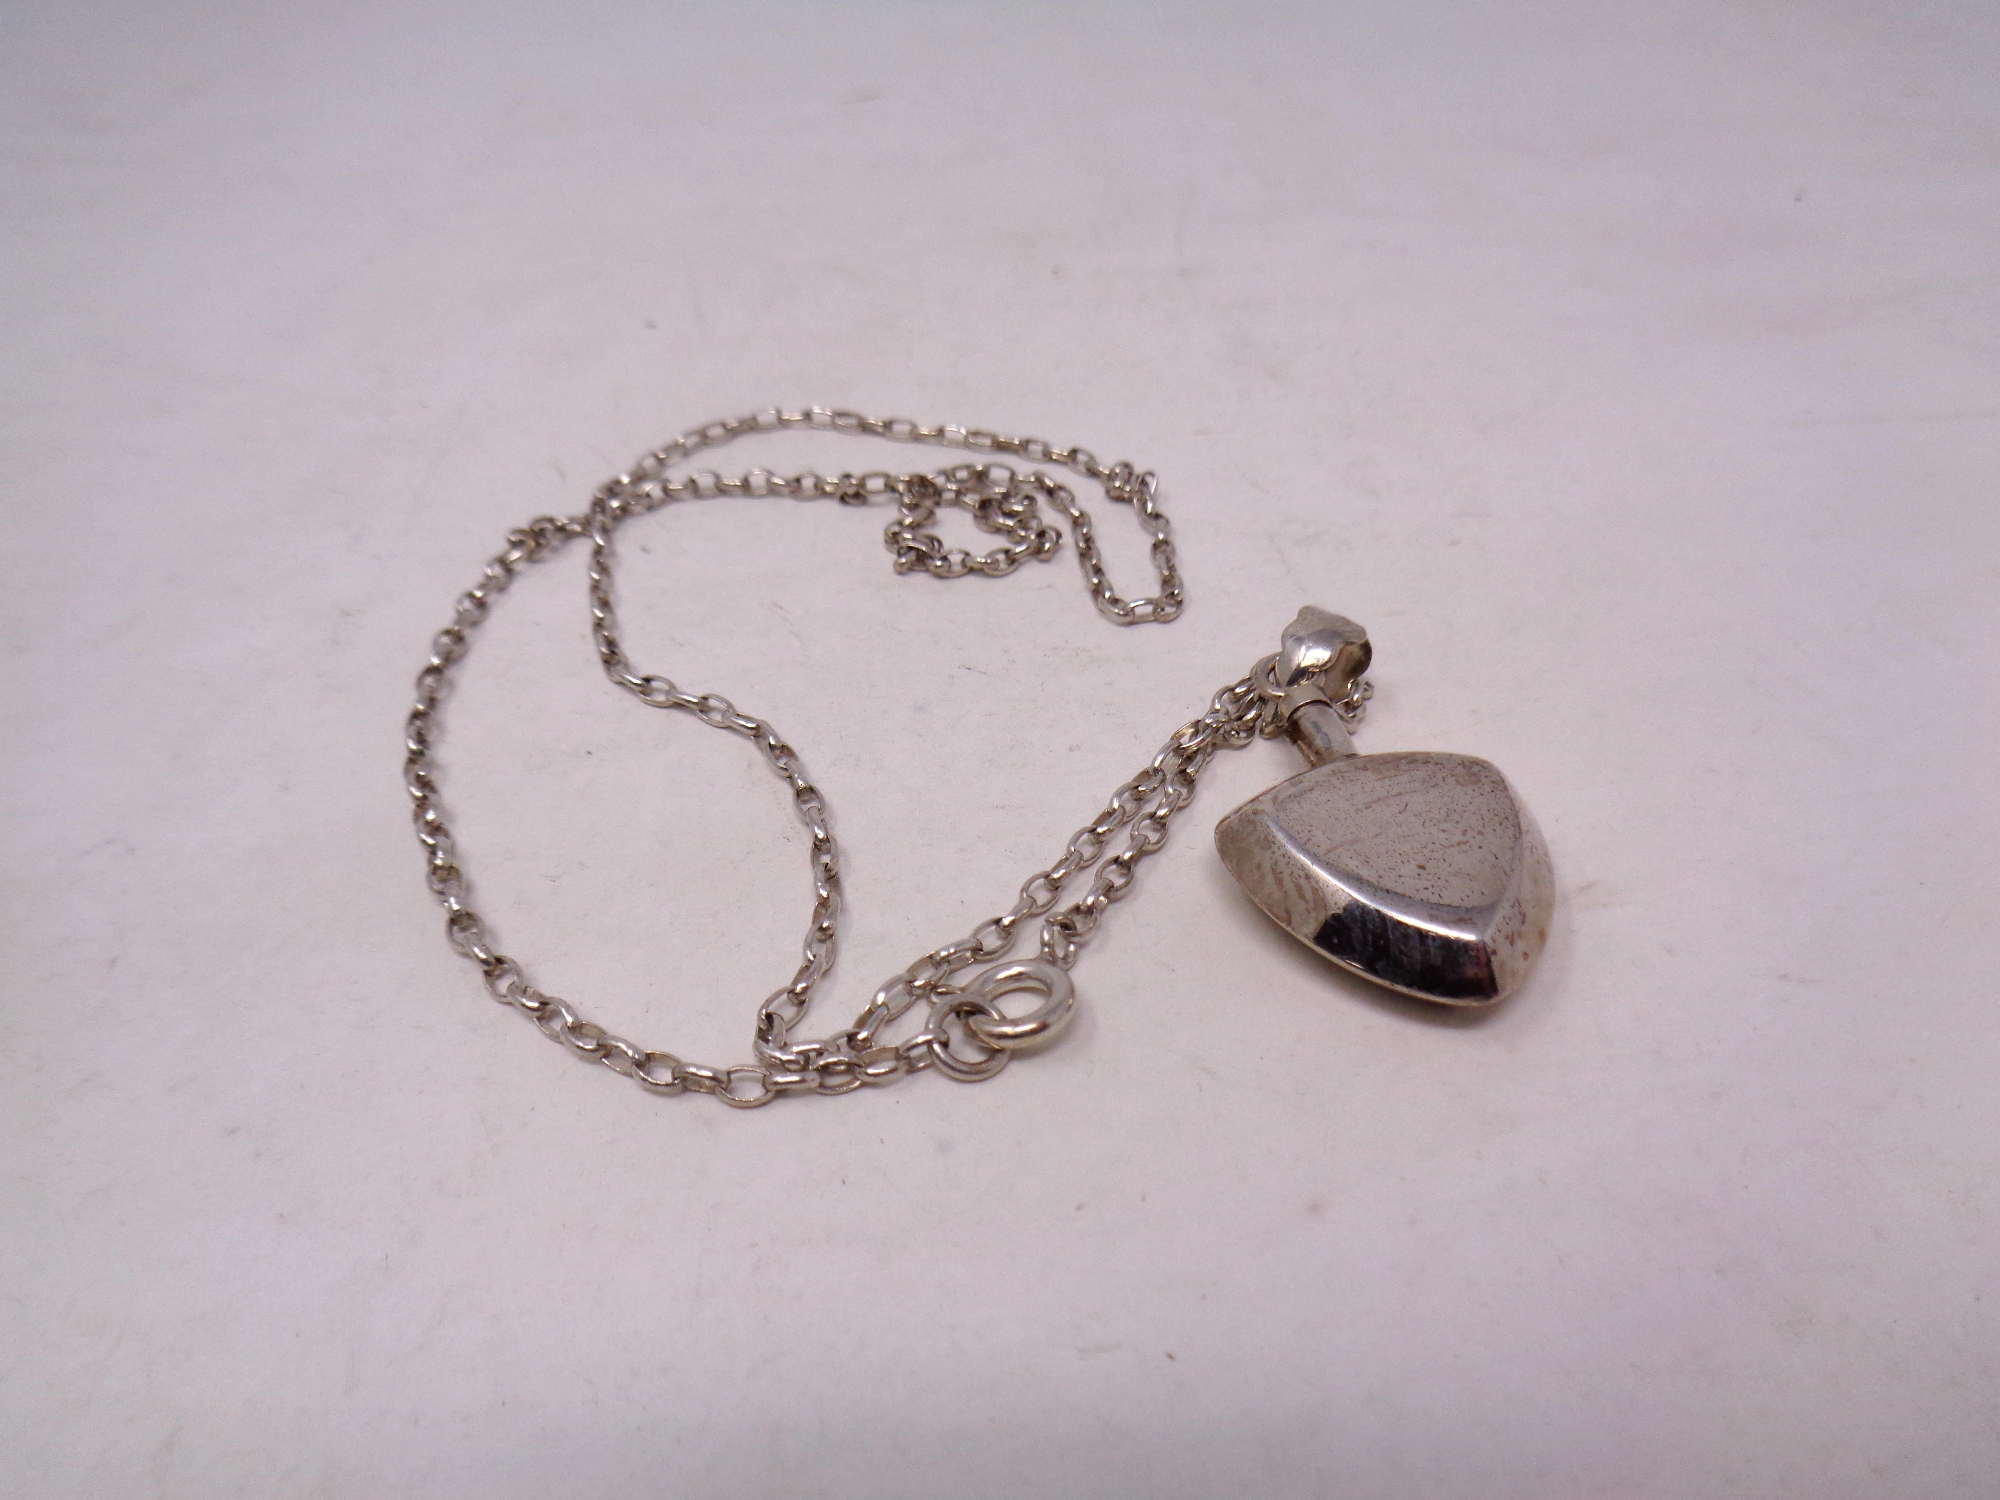 A silver perfume pendant on chain